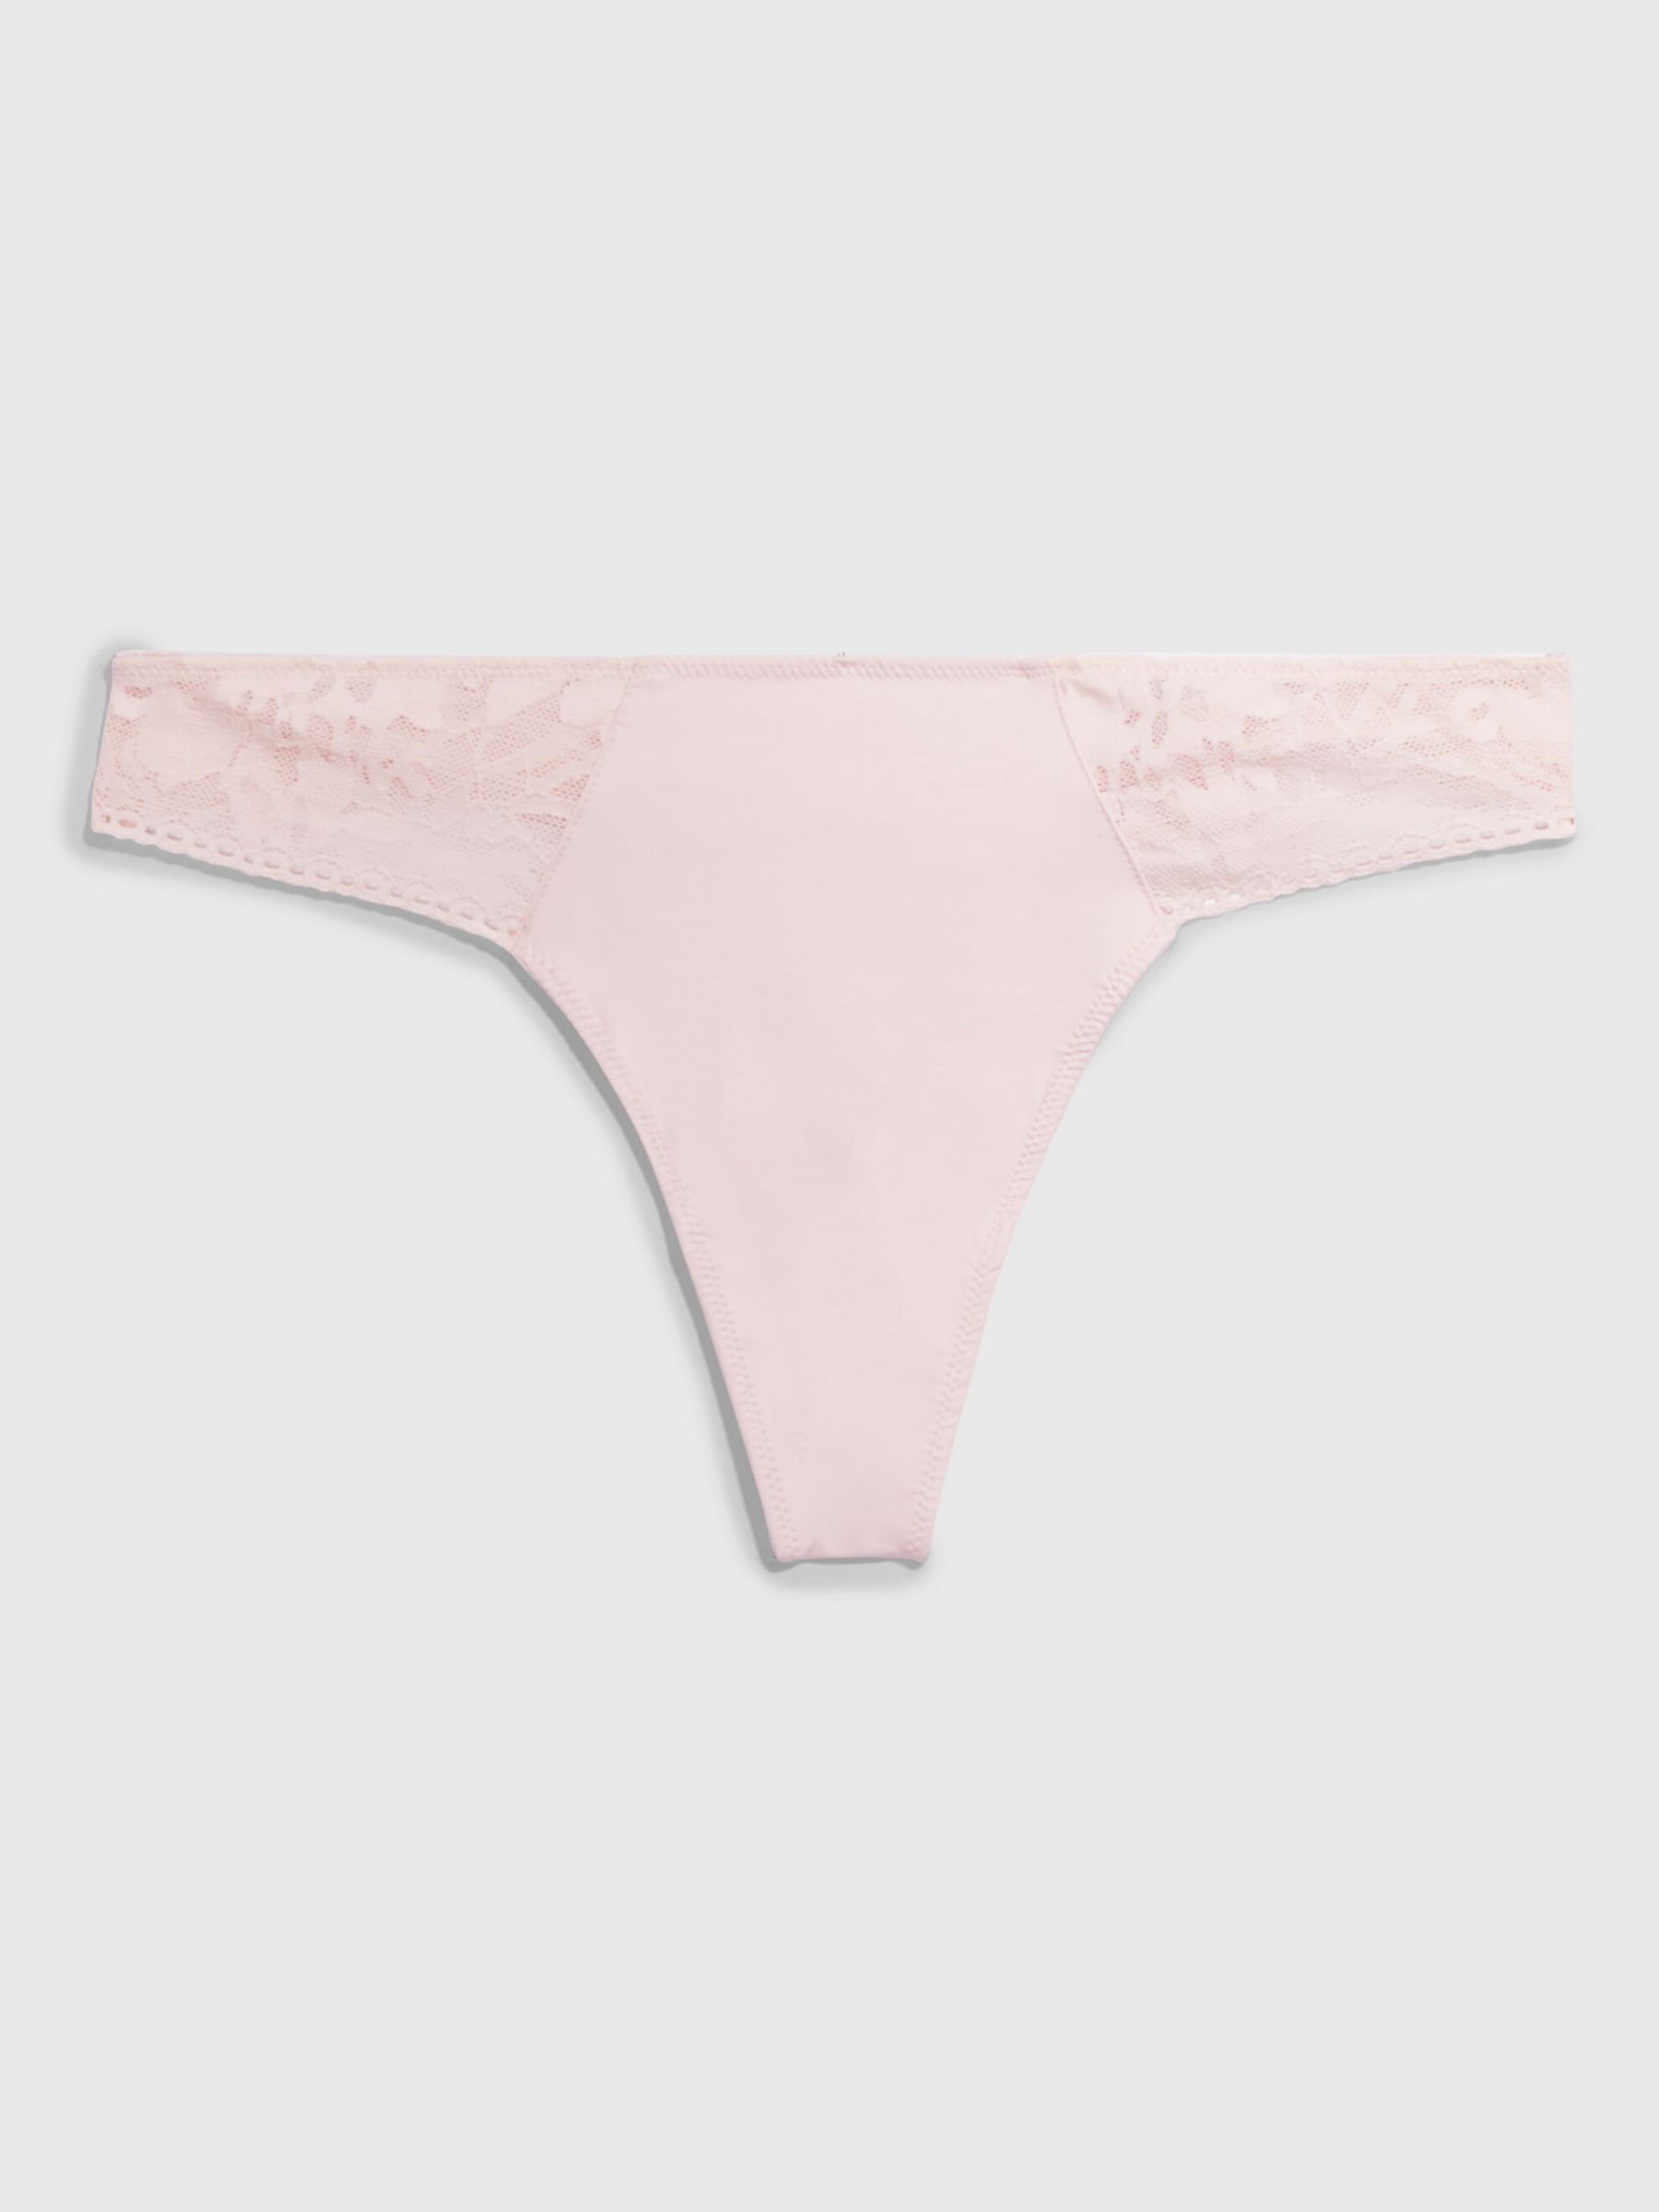 Buy Calvin Klein Ultra Comfort Lace Thong, Nympth’s Thigh Online at johnlewis.com